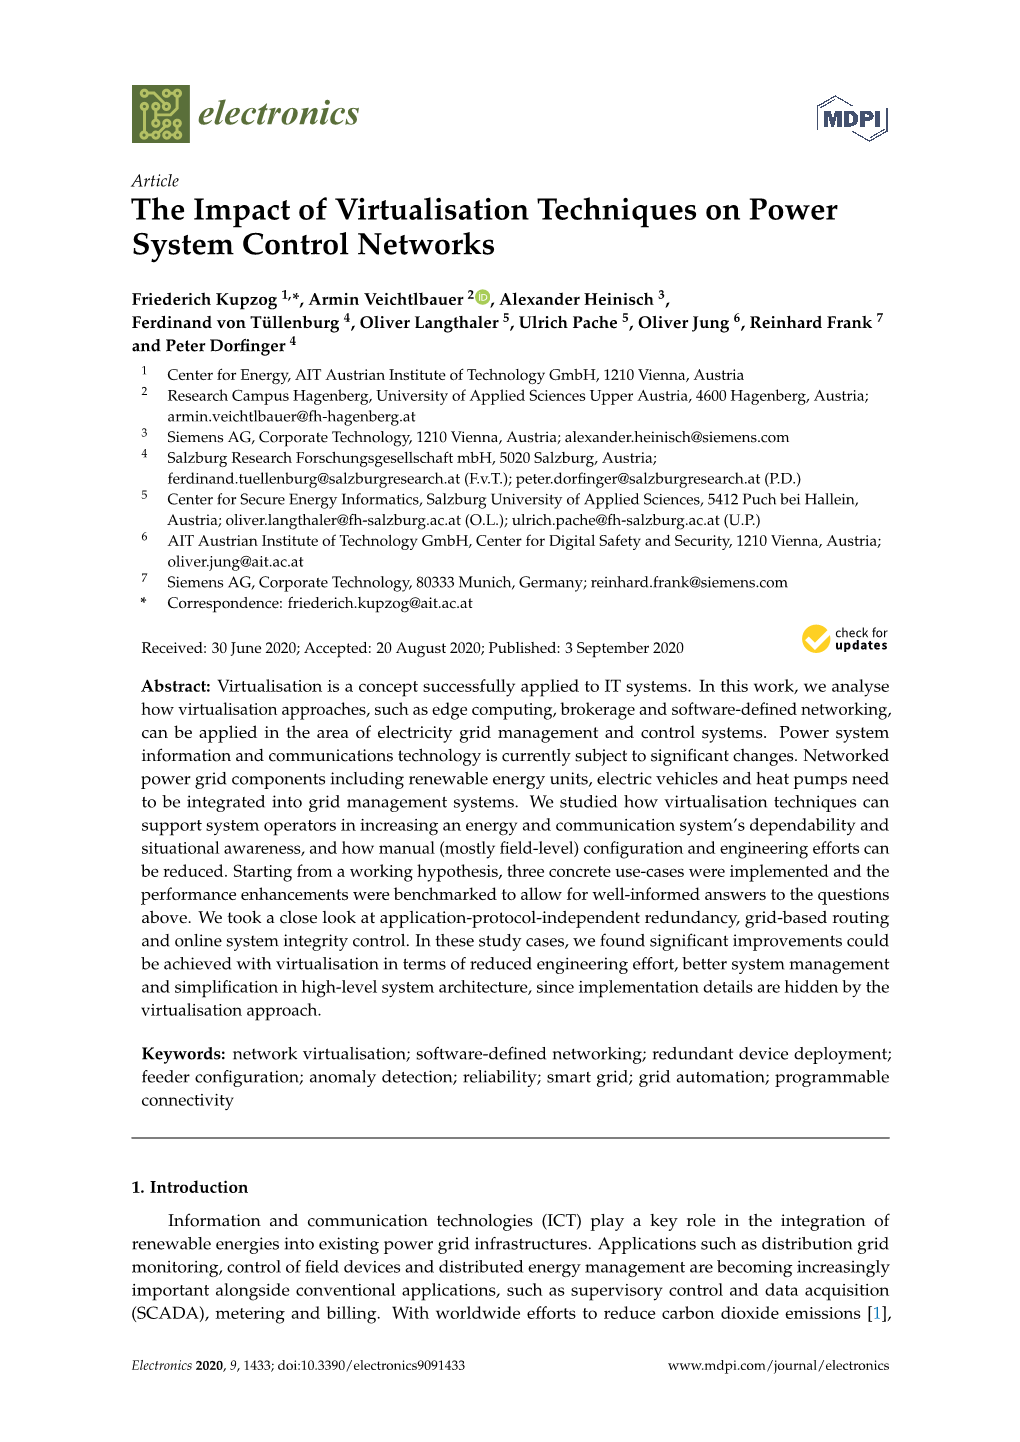 The Impact of Virtualisation Techniques on Power System Control Networks